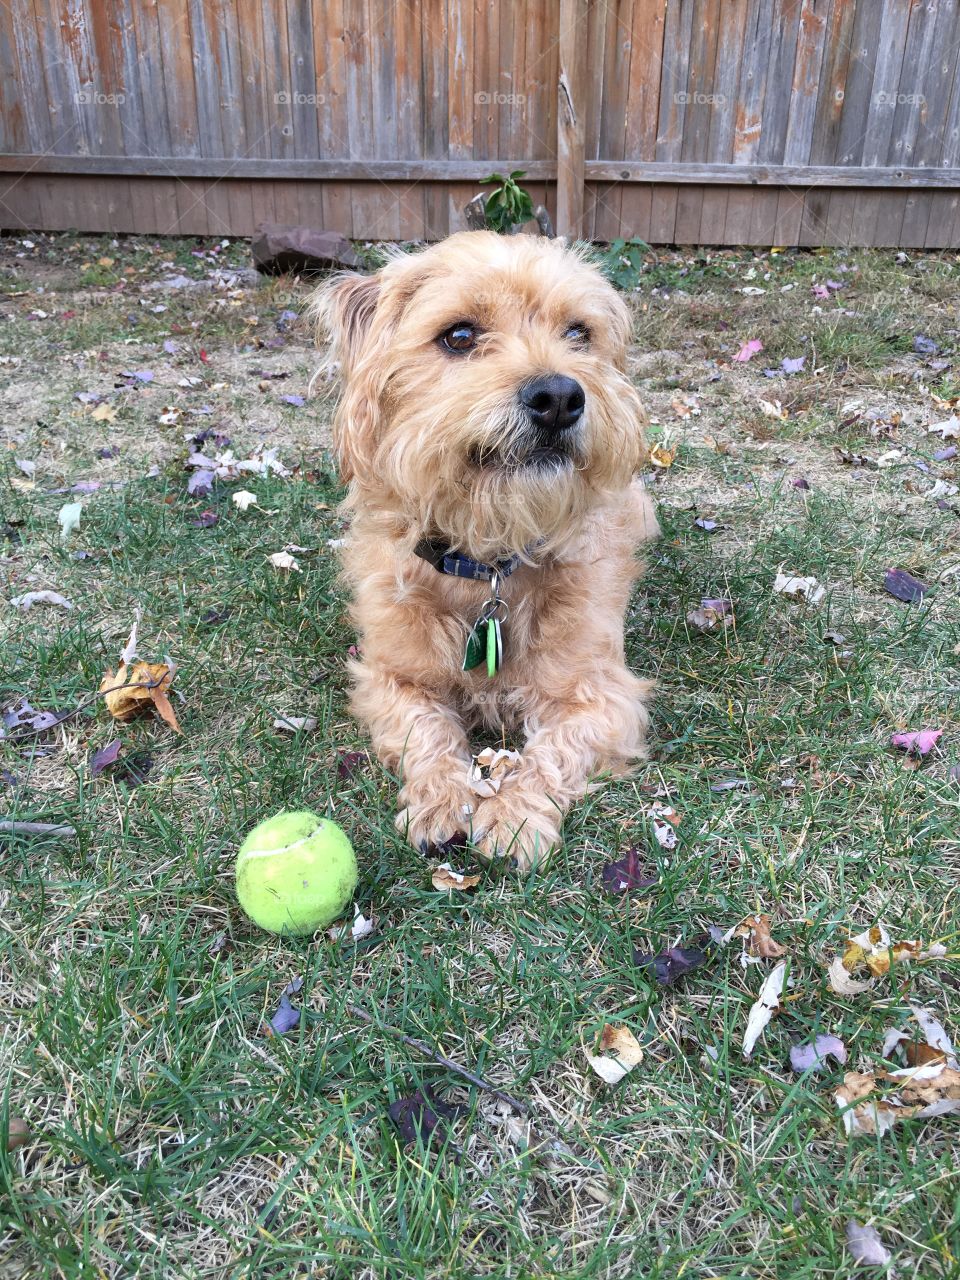 All I need is my tennis ball and a backyard!